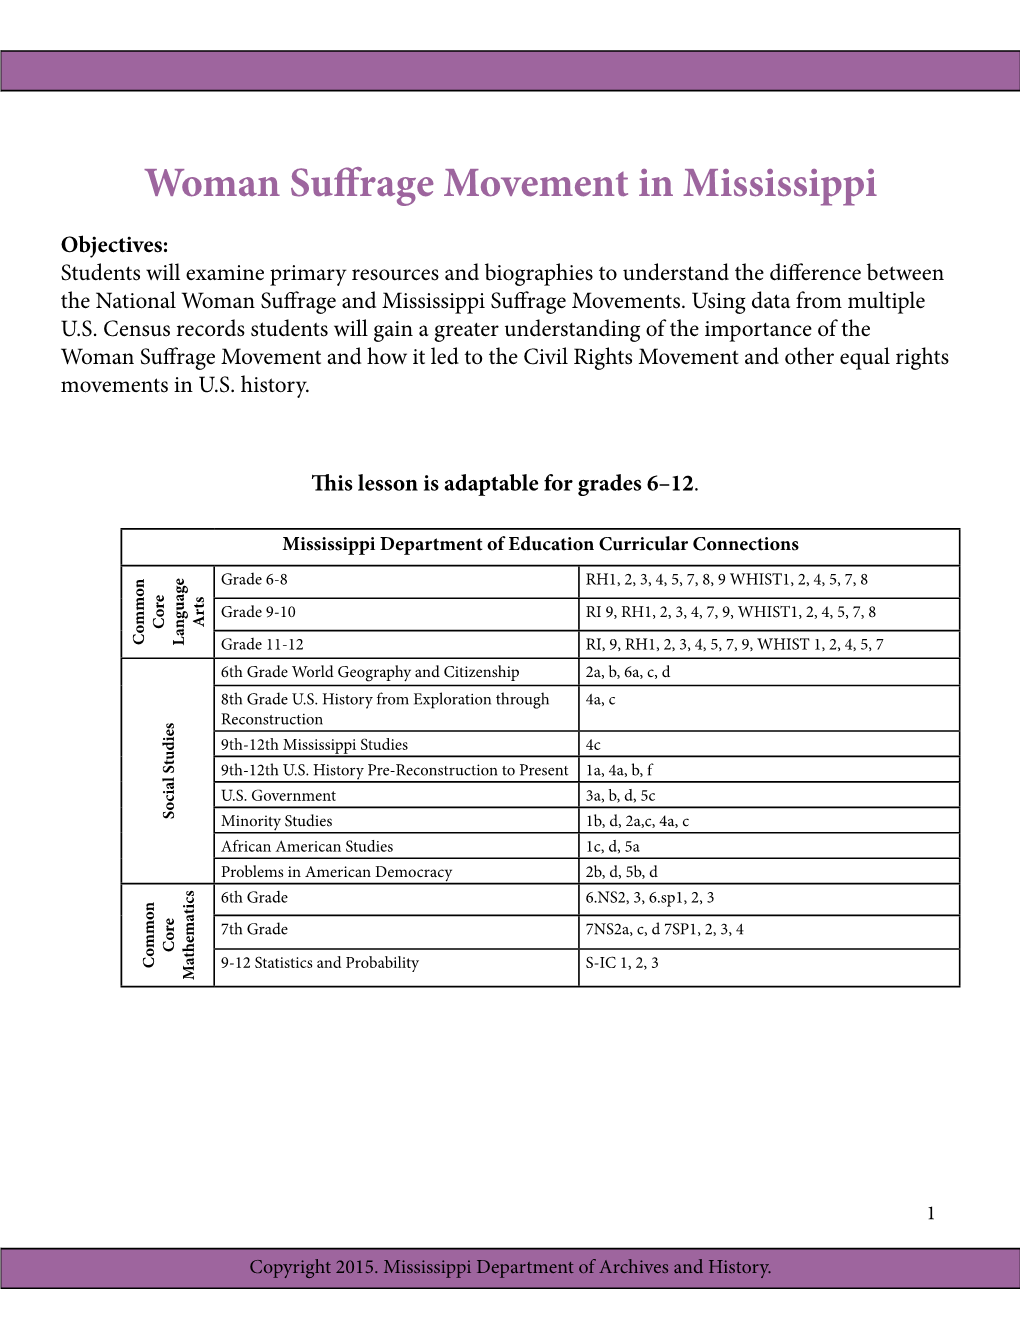 Woman Suffrage Movement in Mississippi